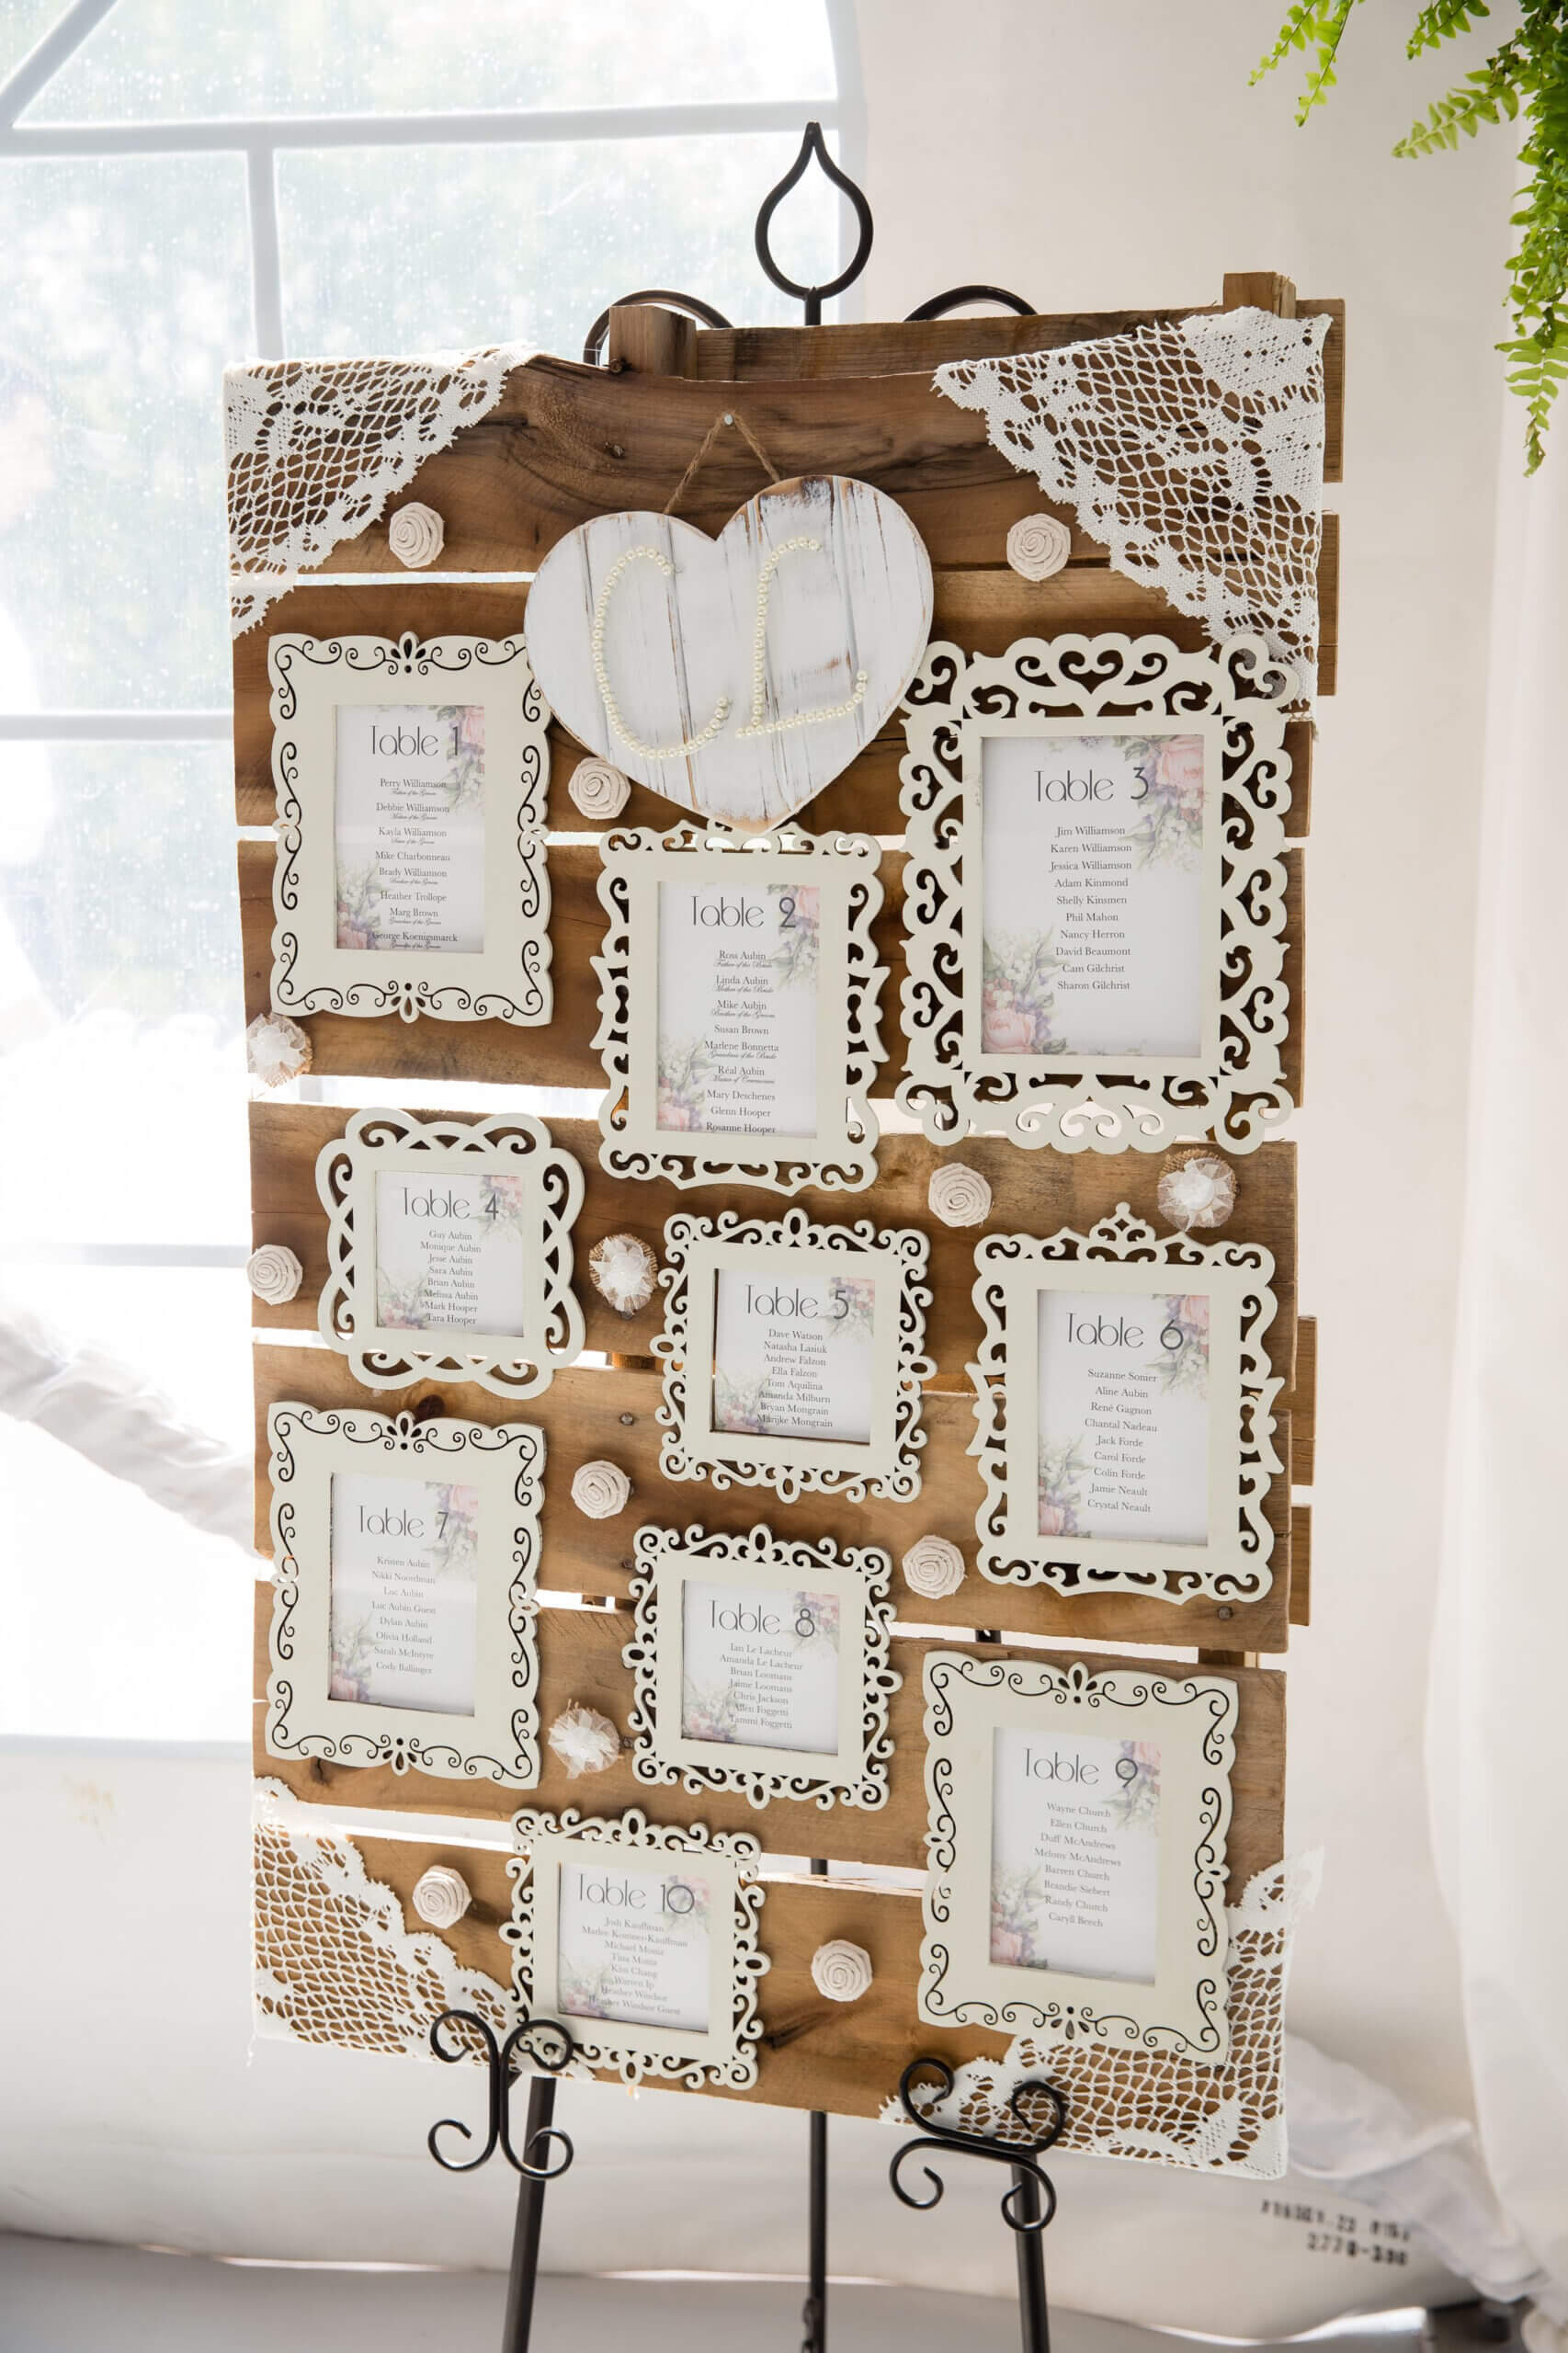 Our Diy Table Seating Chart. I Purchased These Wooden Frames Intended For Michaels Place Card Template